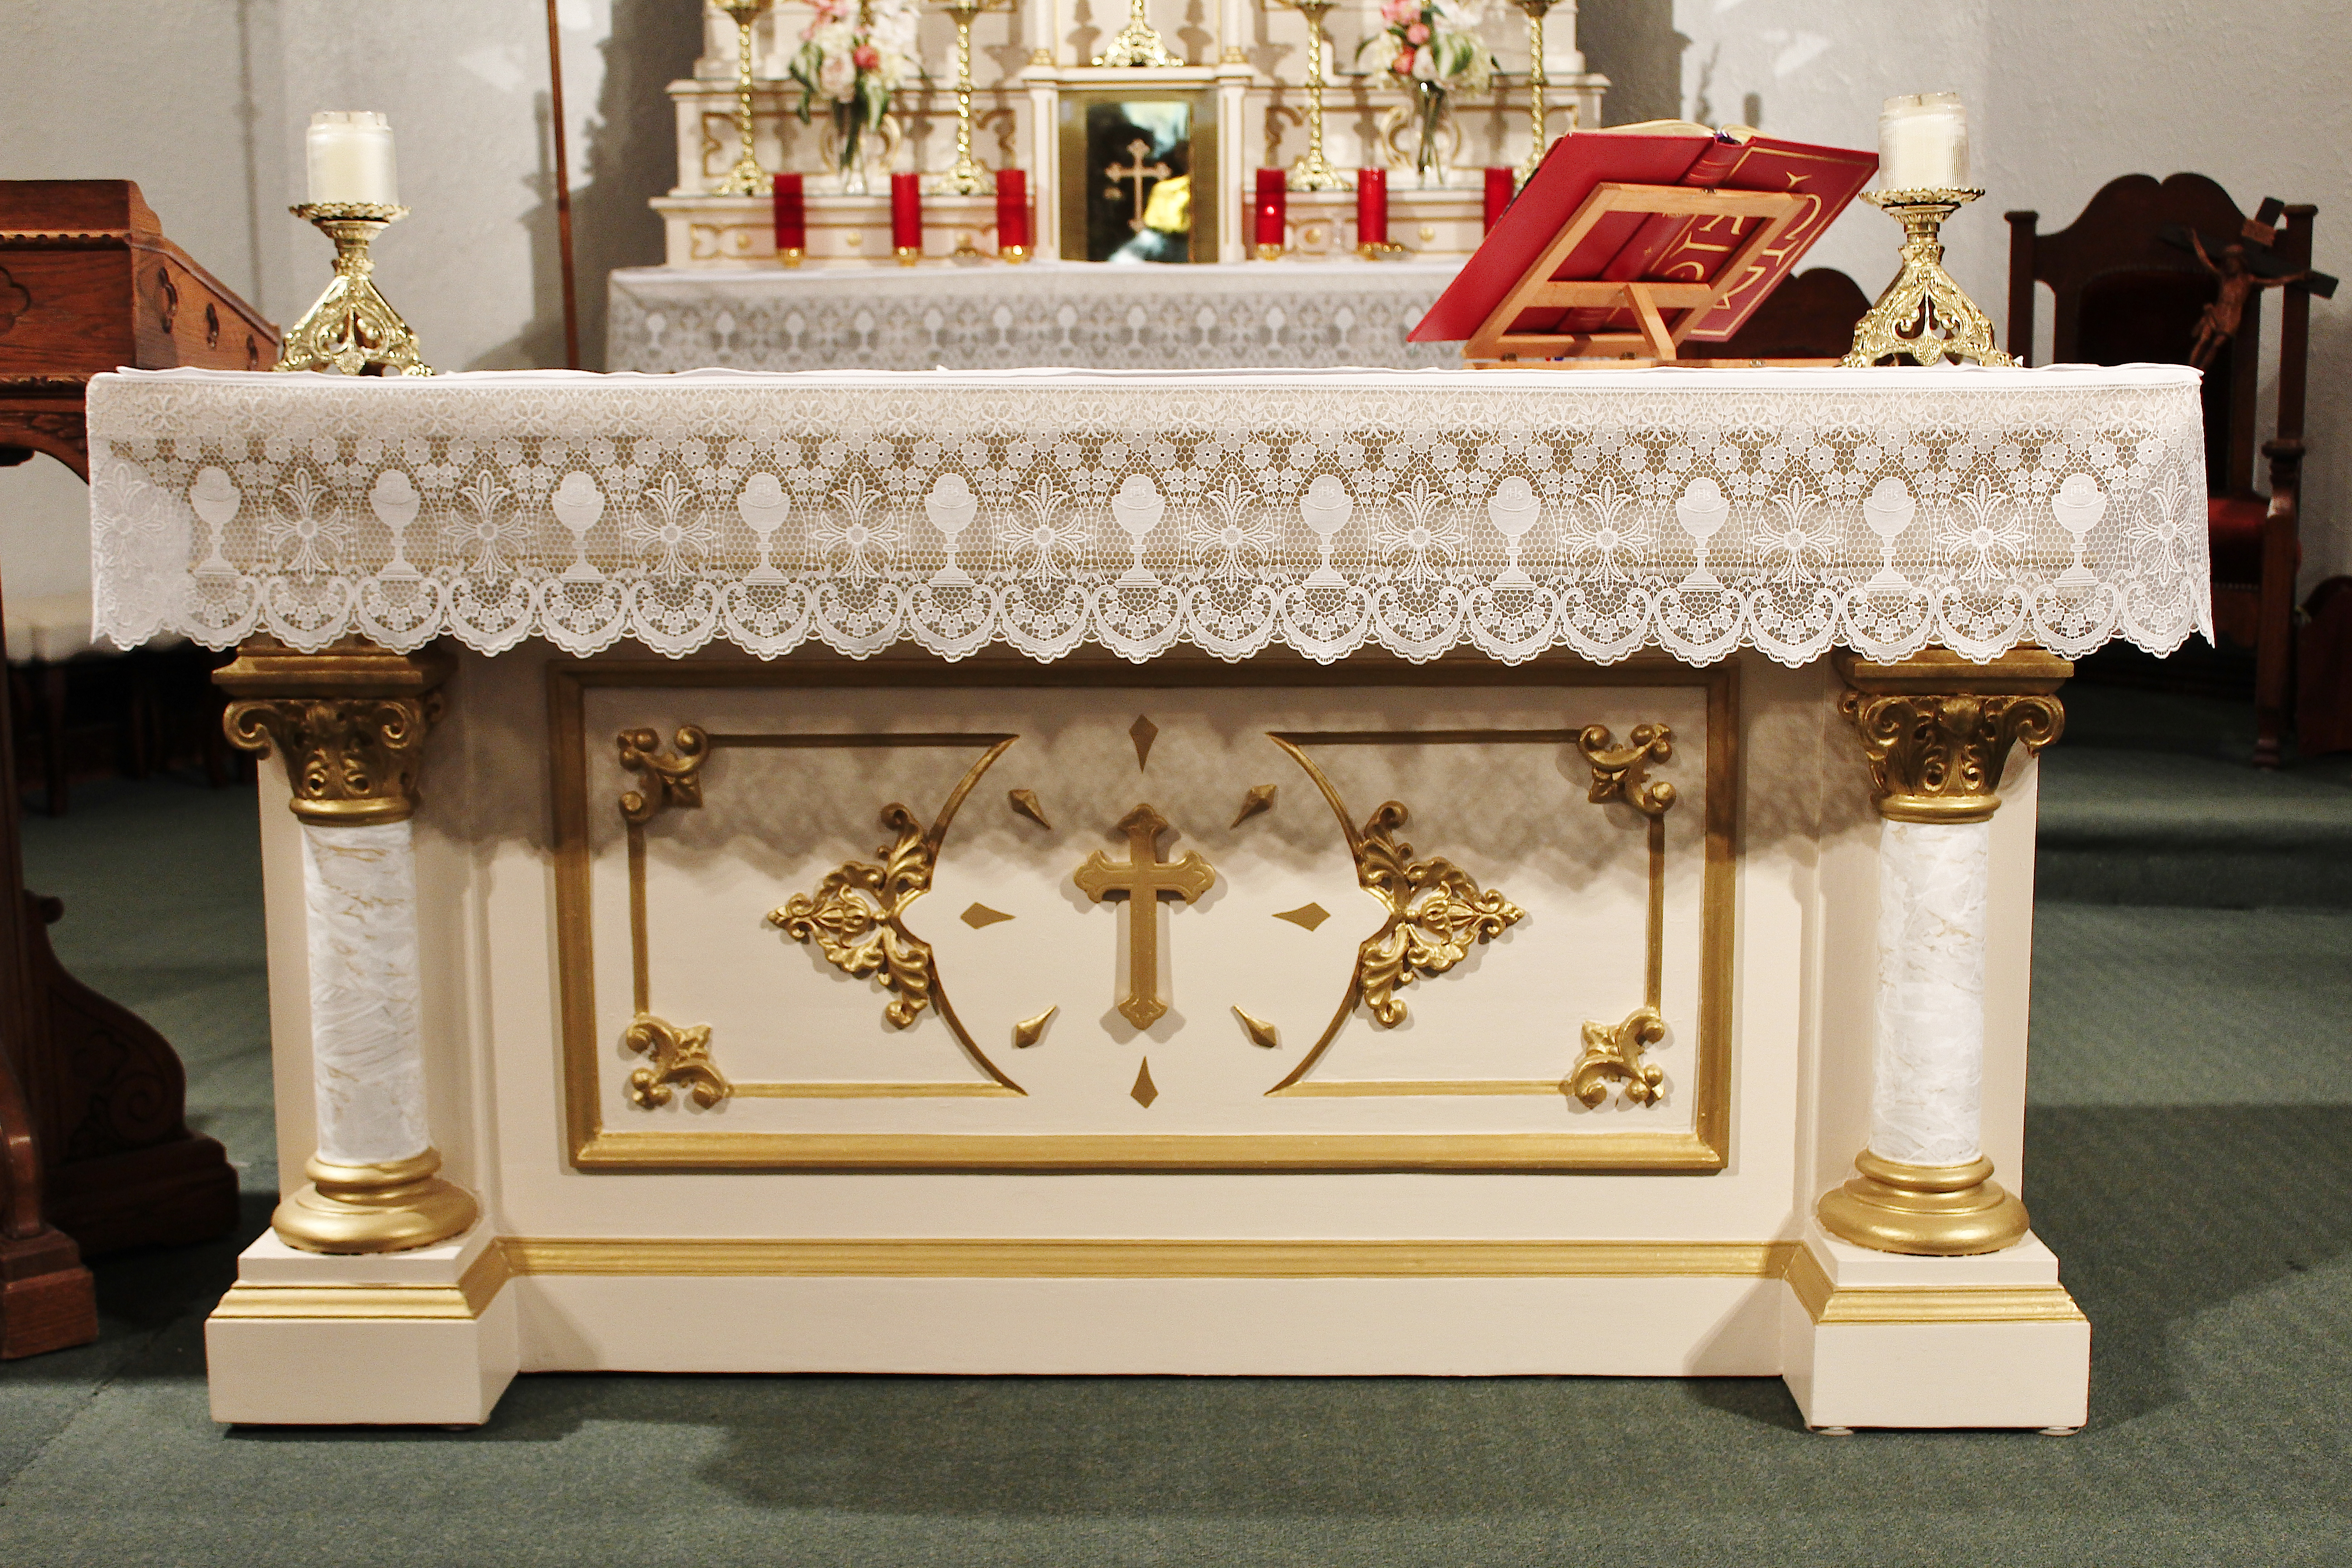 White Altar with lace cloth, ornate gold painted filigree, and marble columns